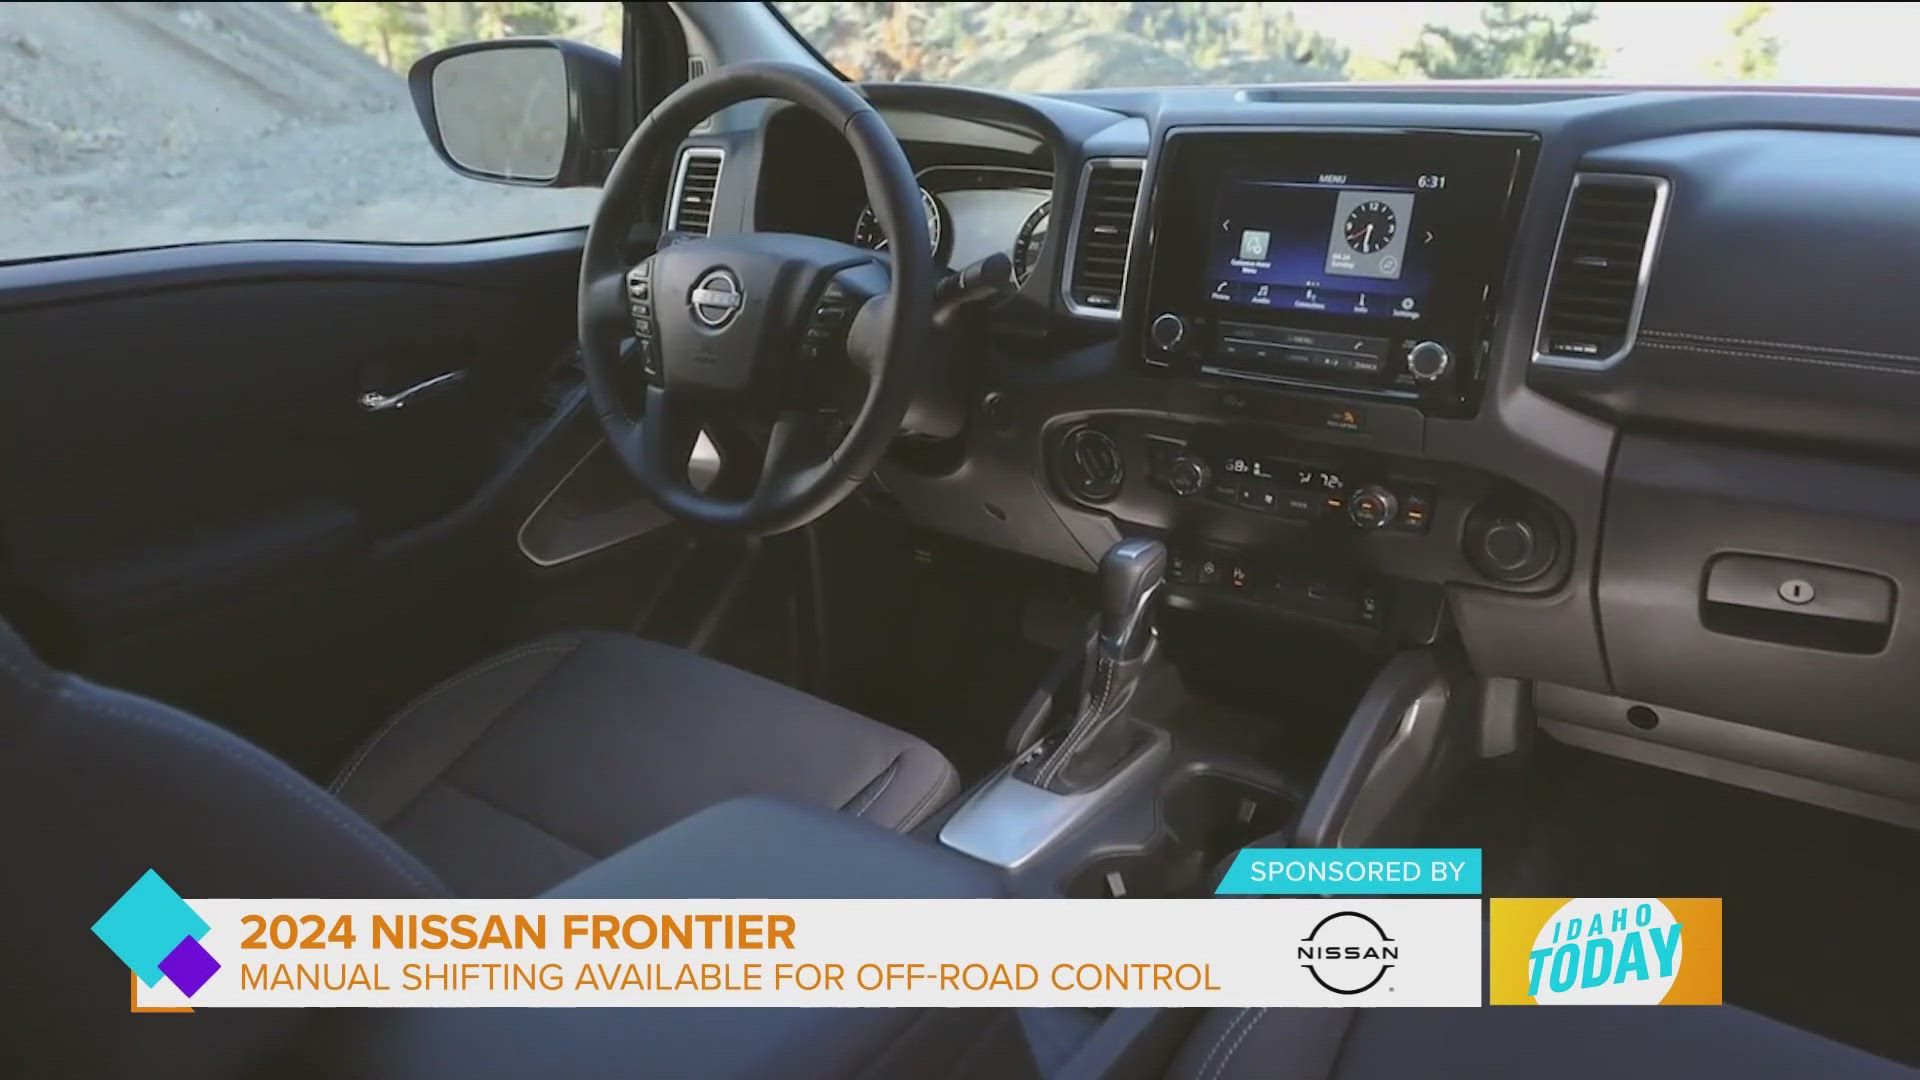 The 2024 Nissan Frontier: Totally Tubular